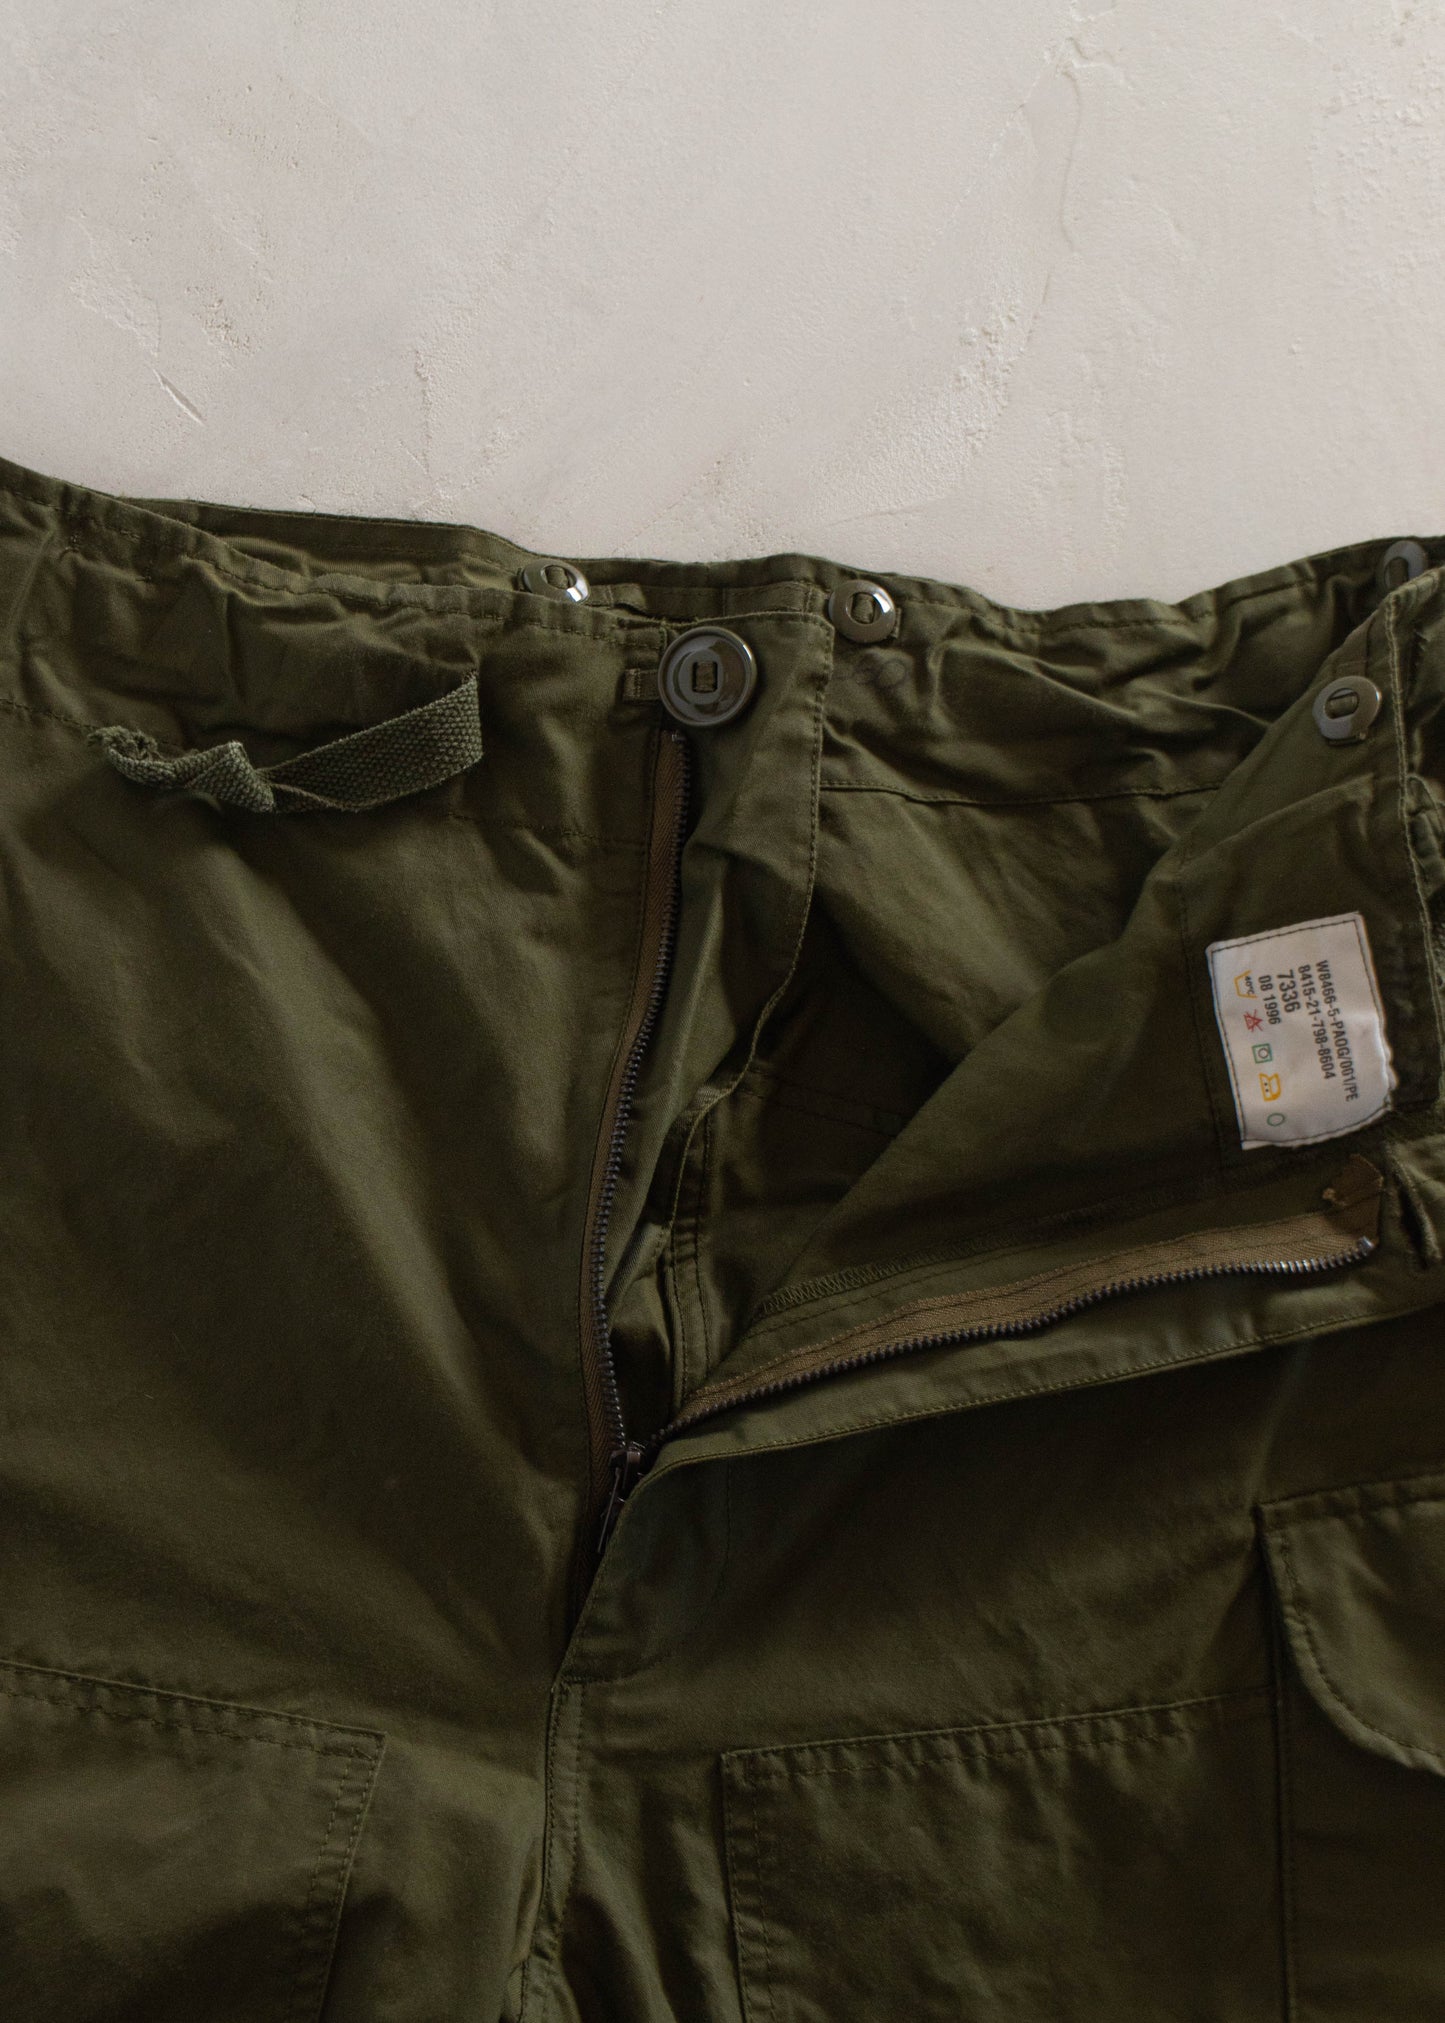 1990s Military Wind Cargo Pants Size M/L